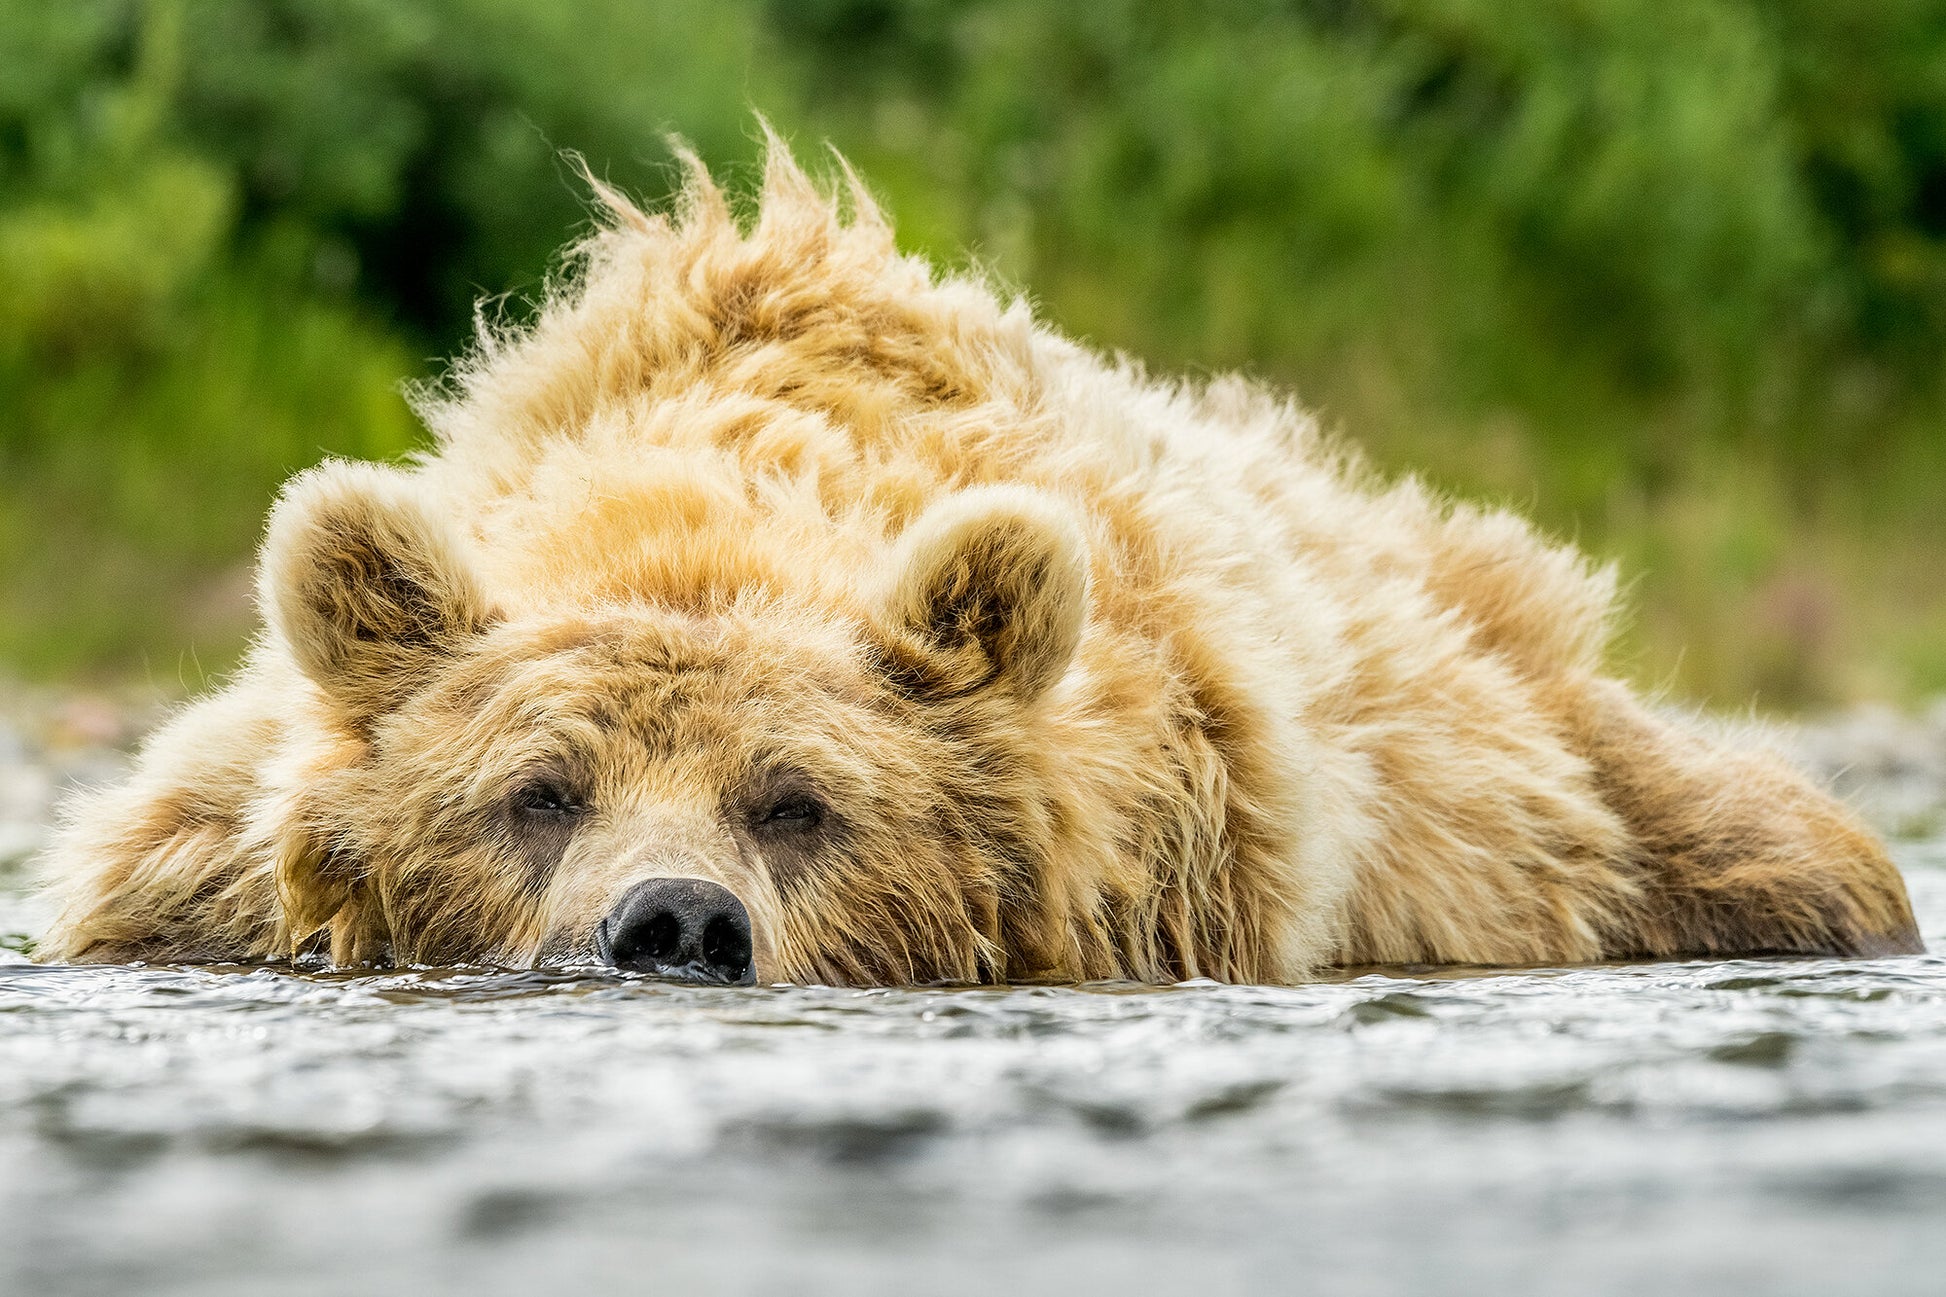 Salmon Induced Snooze- A photograph by Mark McInnis. 